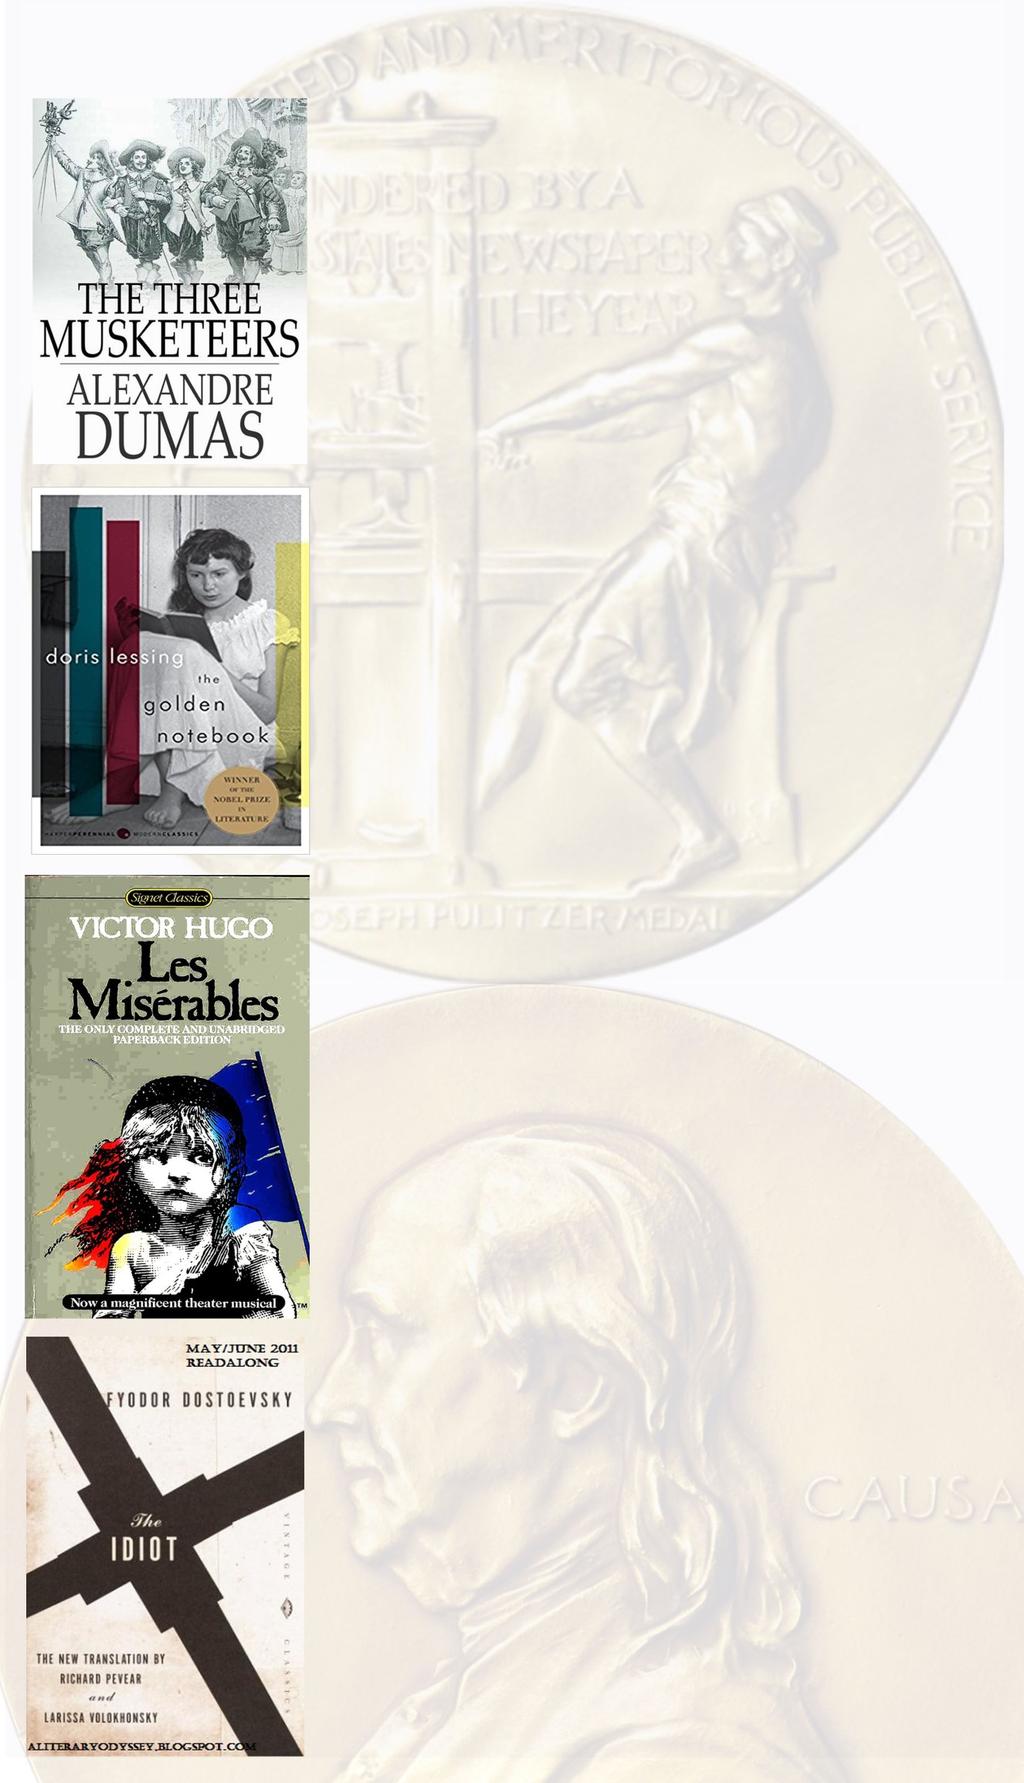 15 CRITICS CHOICE NOVELS RECOMMENDED BY GRUBSTREET MOVIES RECOMMENDED BY MONTAGE The Three Musketeers is a historical novel by Alexandre Dumas.